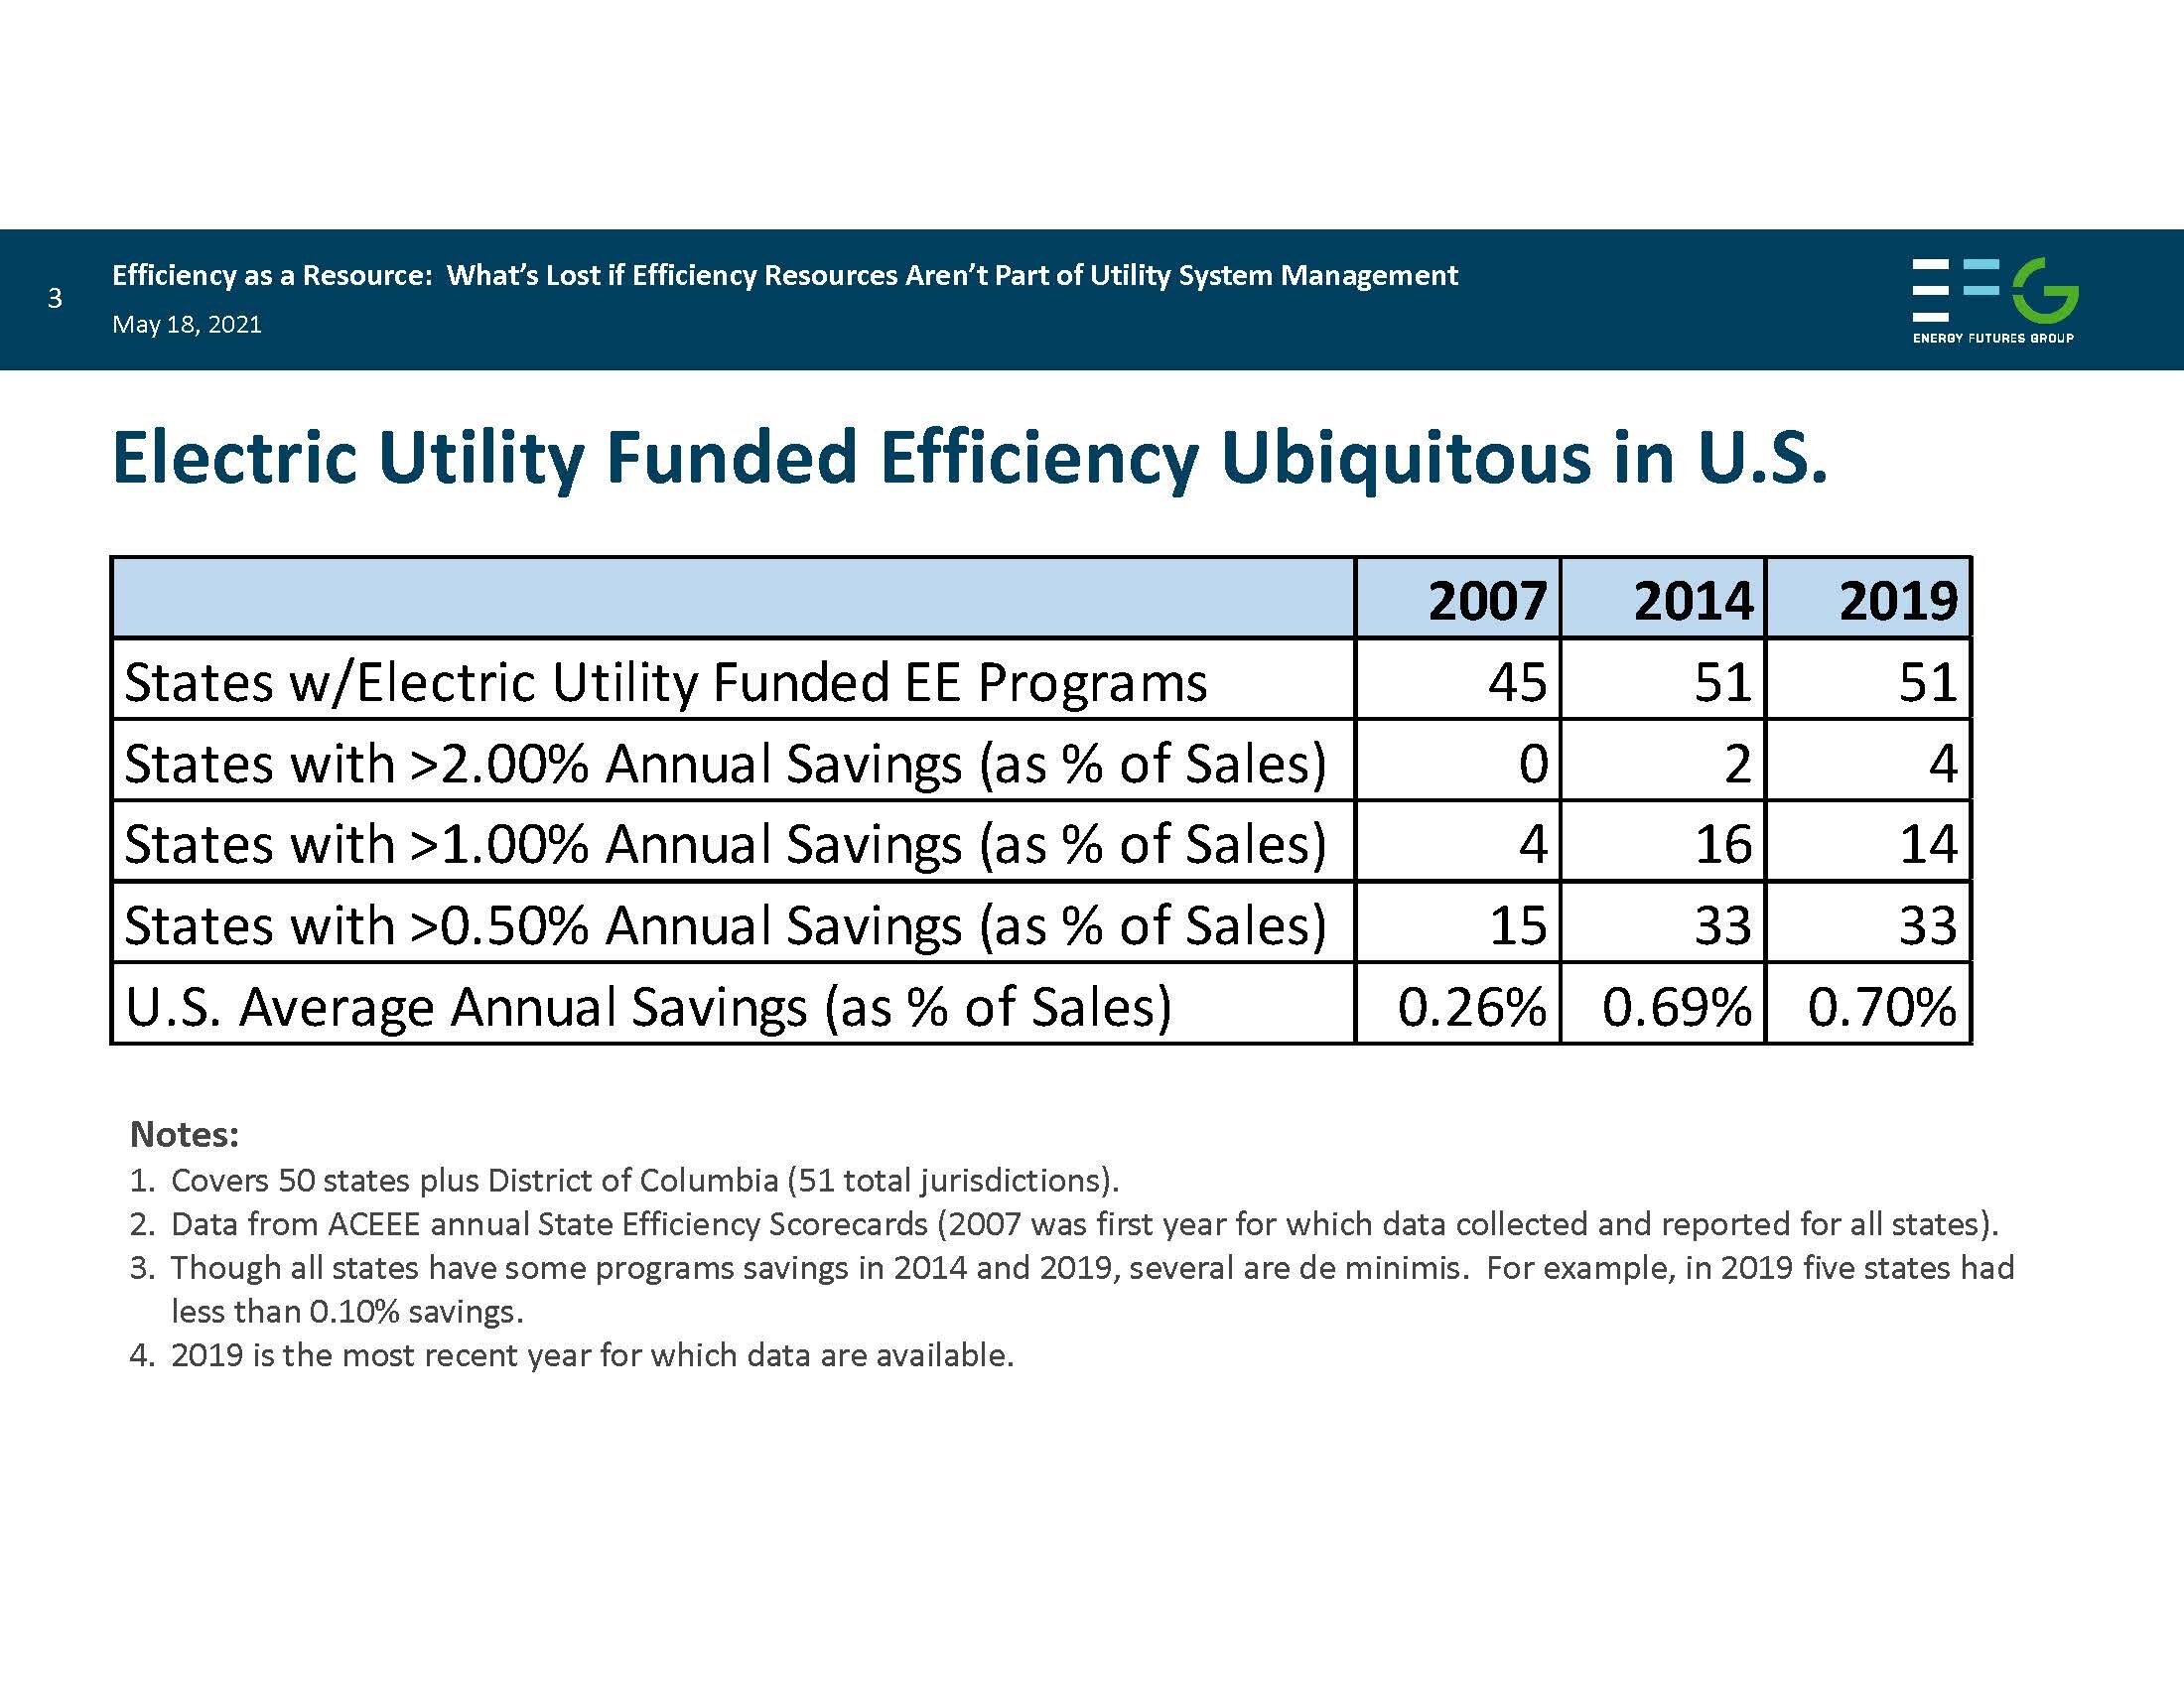 Energy Efficiency as a Resource Chris Neme Energy Futures_Page_03.jpg